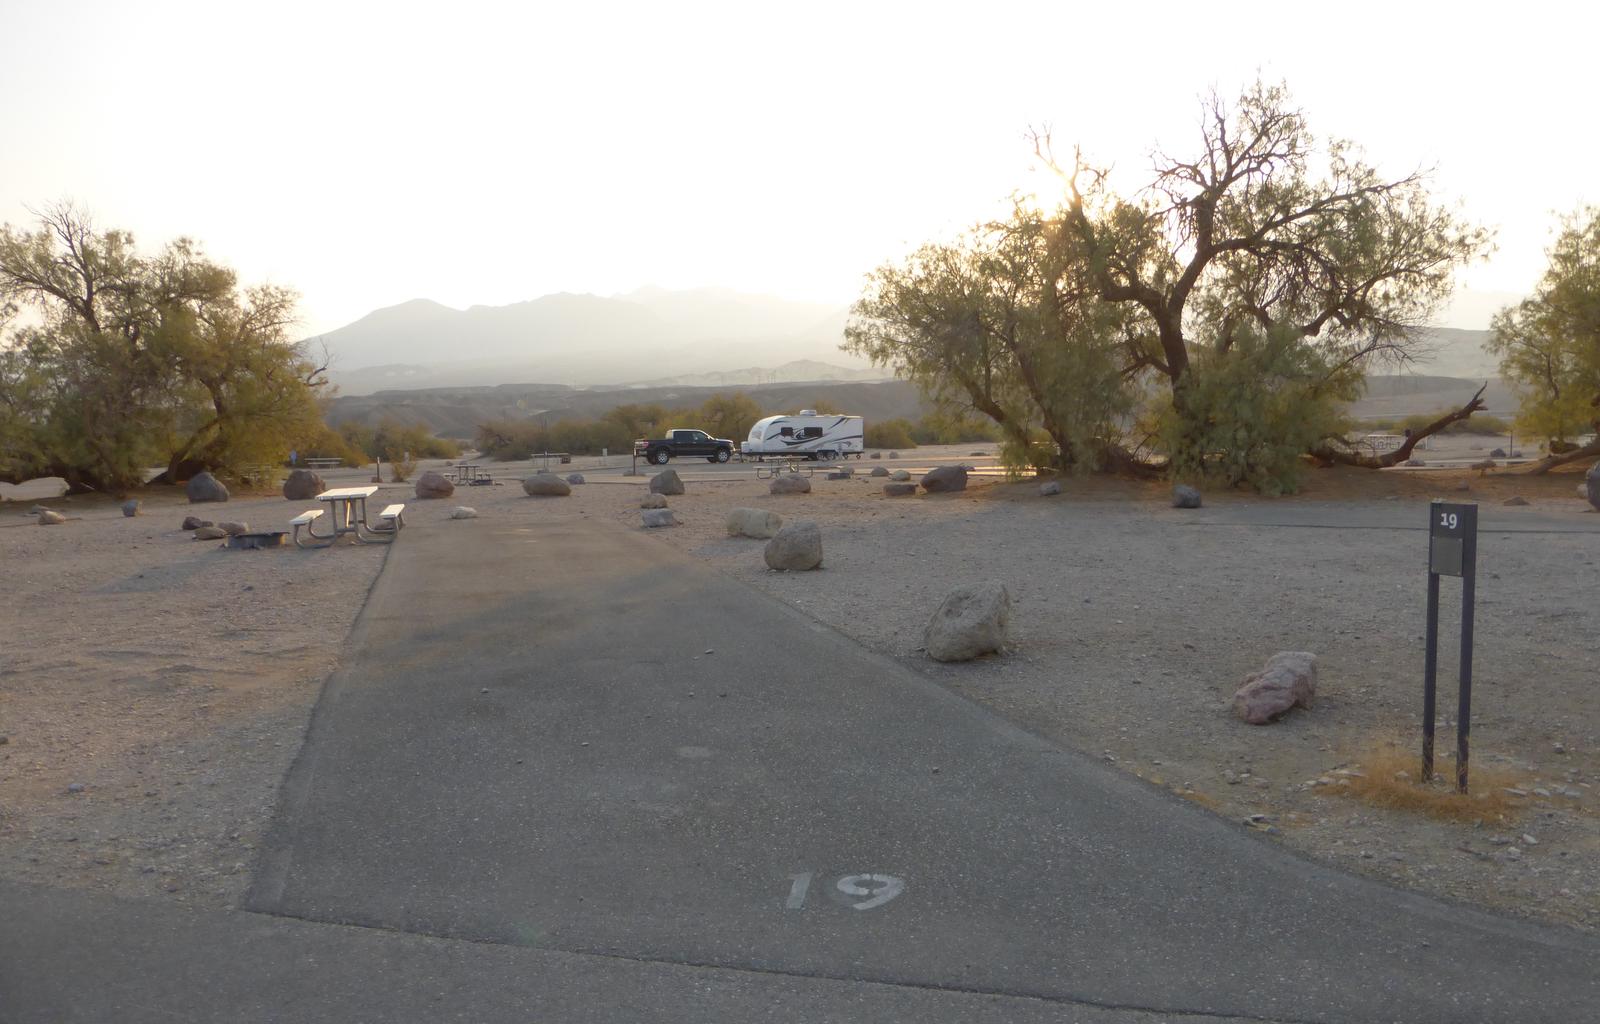 Furnace Creek Campground standard nonelectric site #19 with picnic table and fire ring